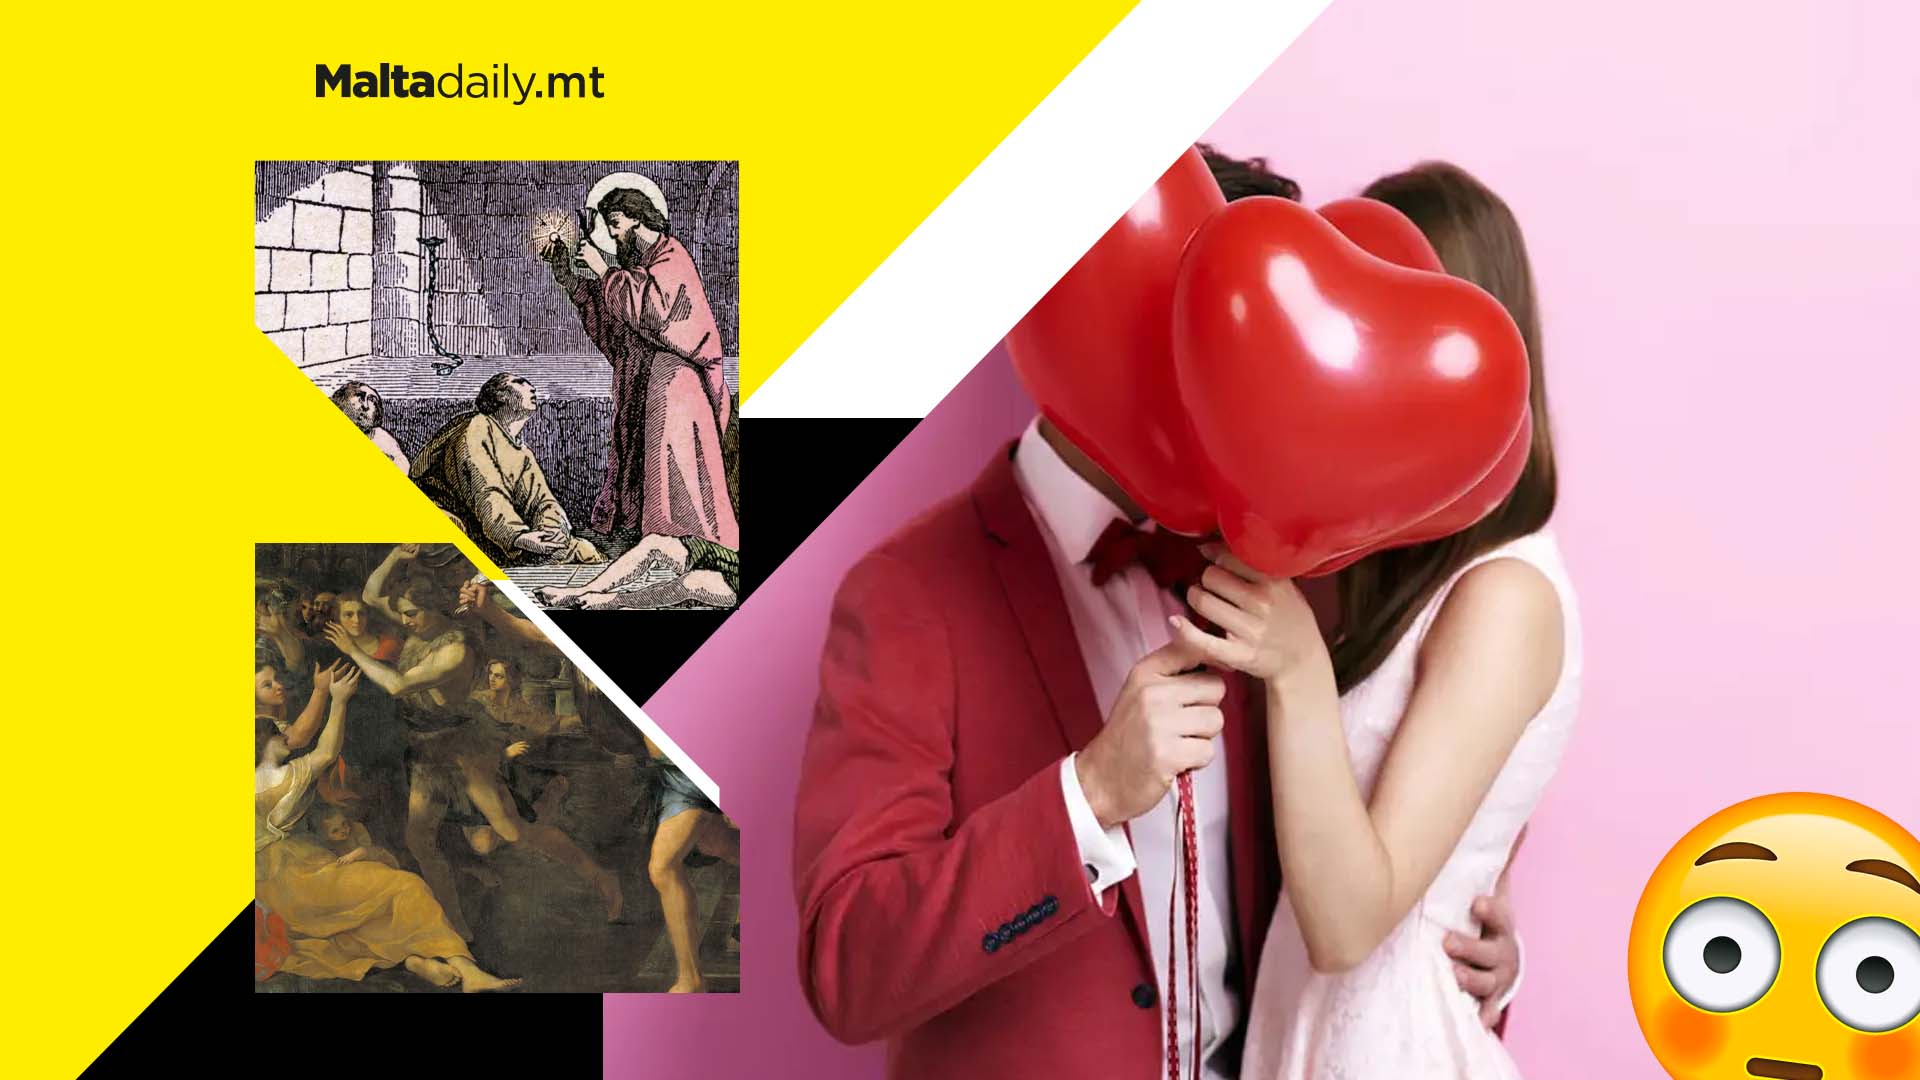 Valentine’s Day has quite the bloody and bizarre history